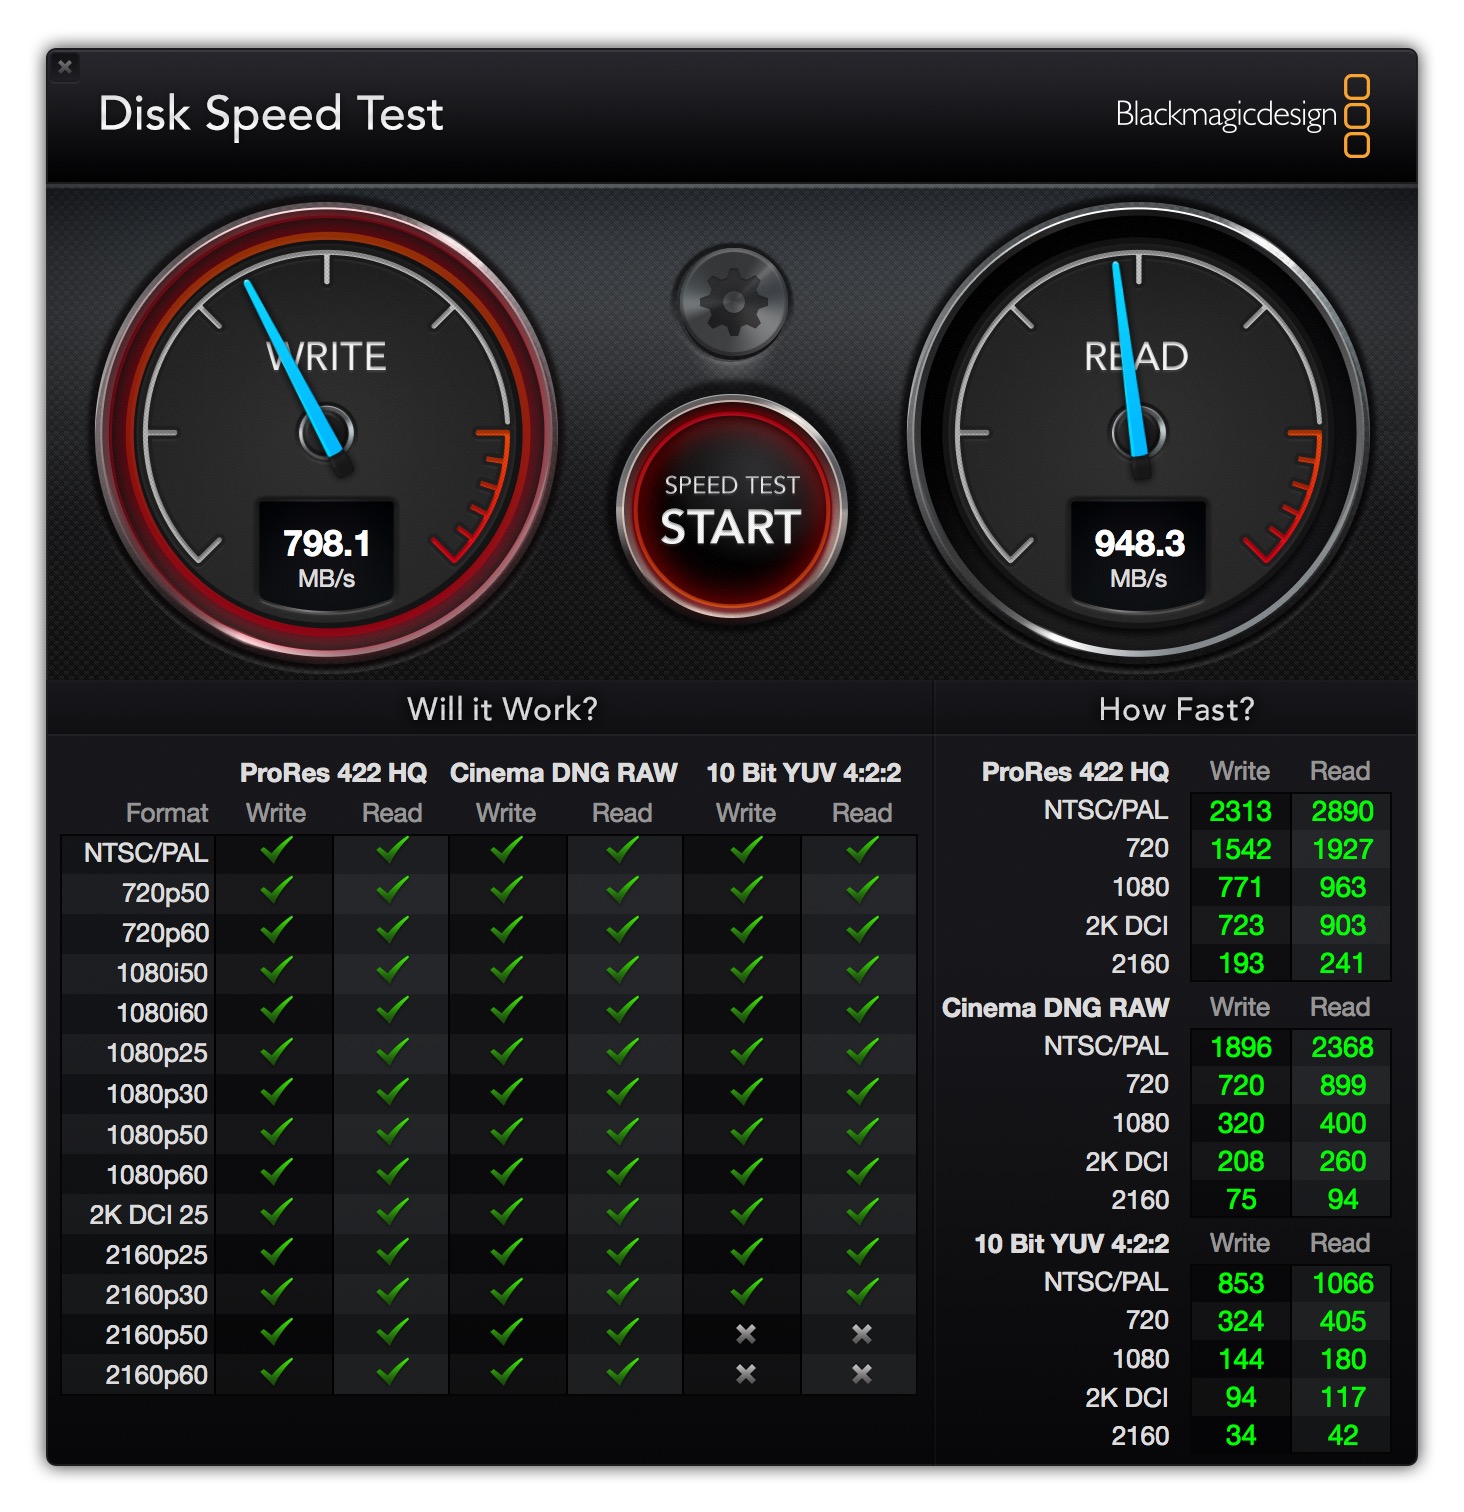 blackmagic-disk-speed-test-12%22-macbook-early-2016